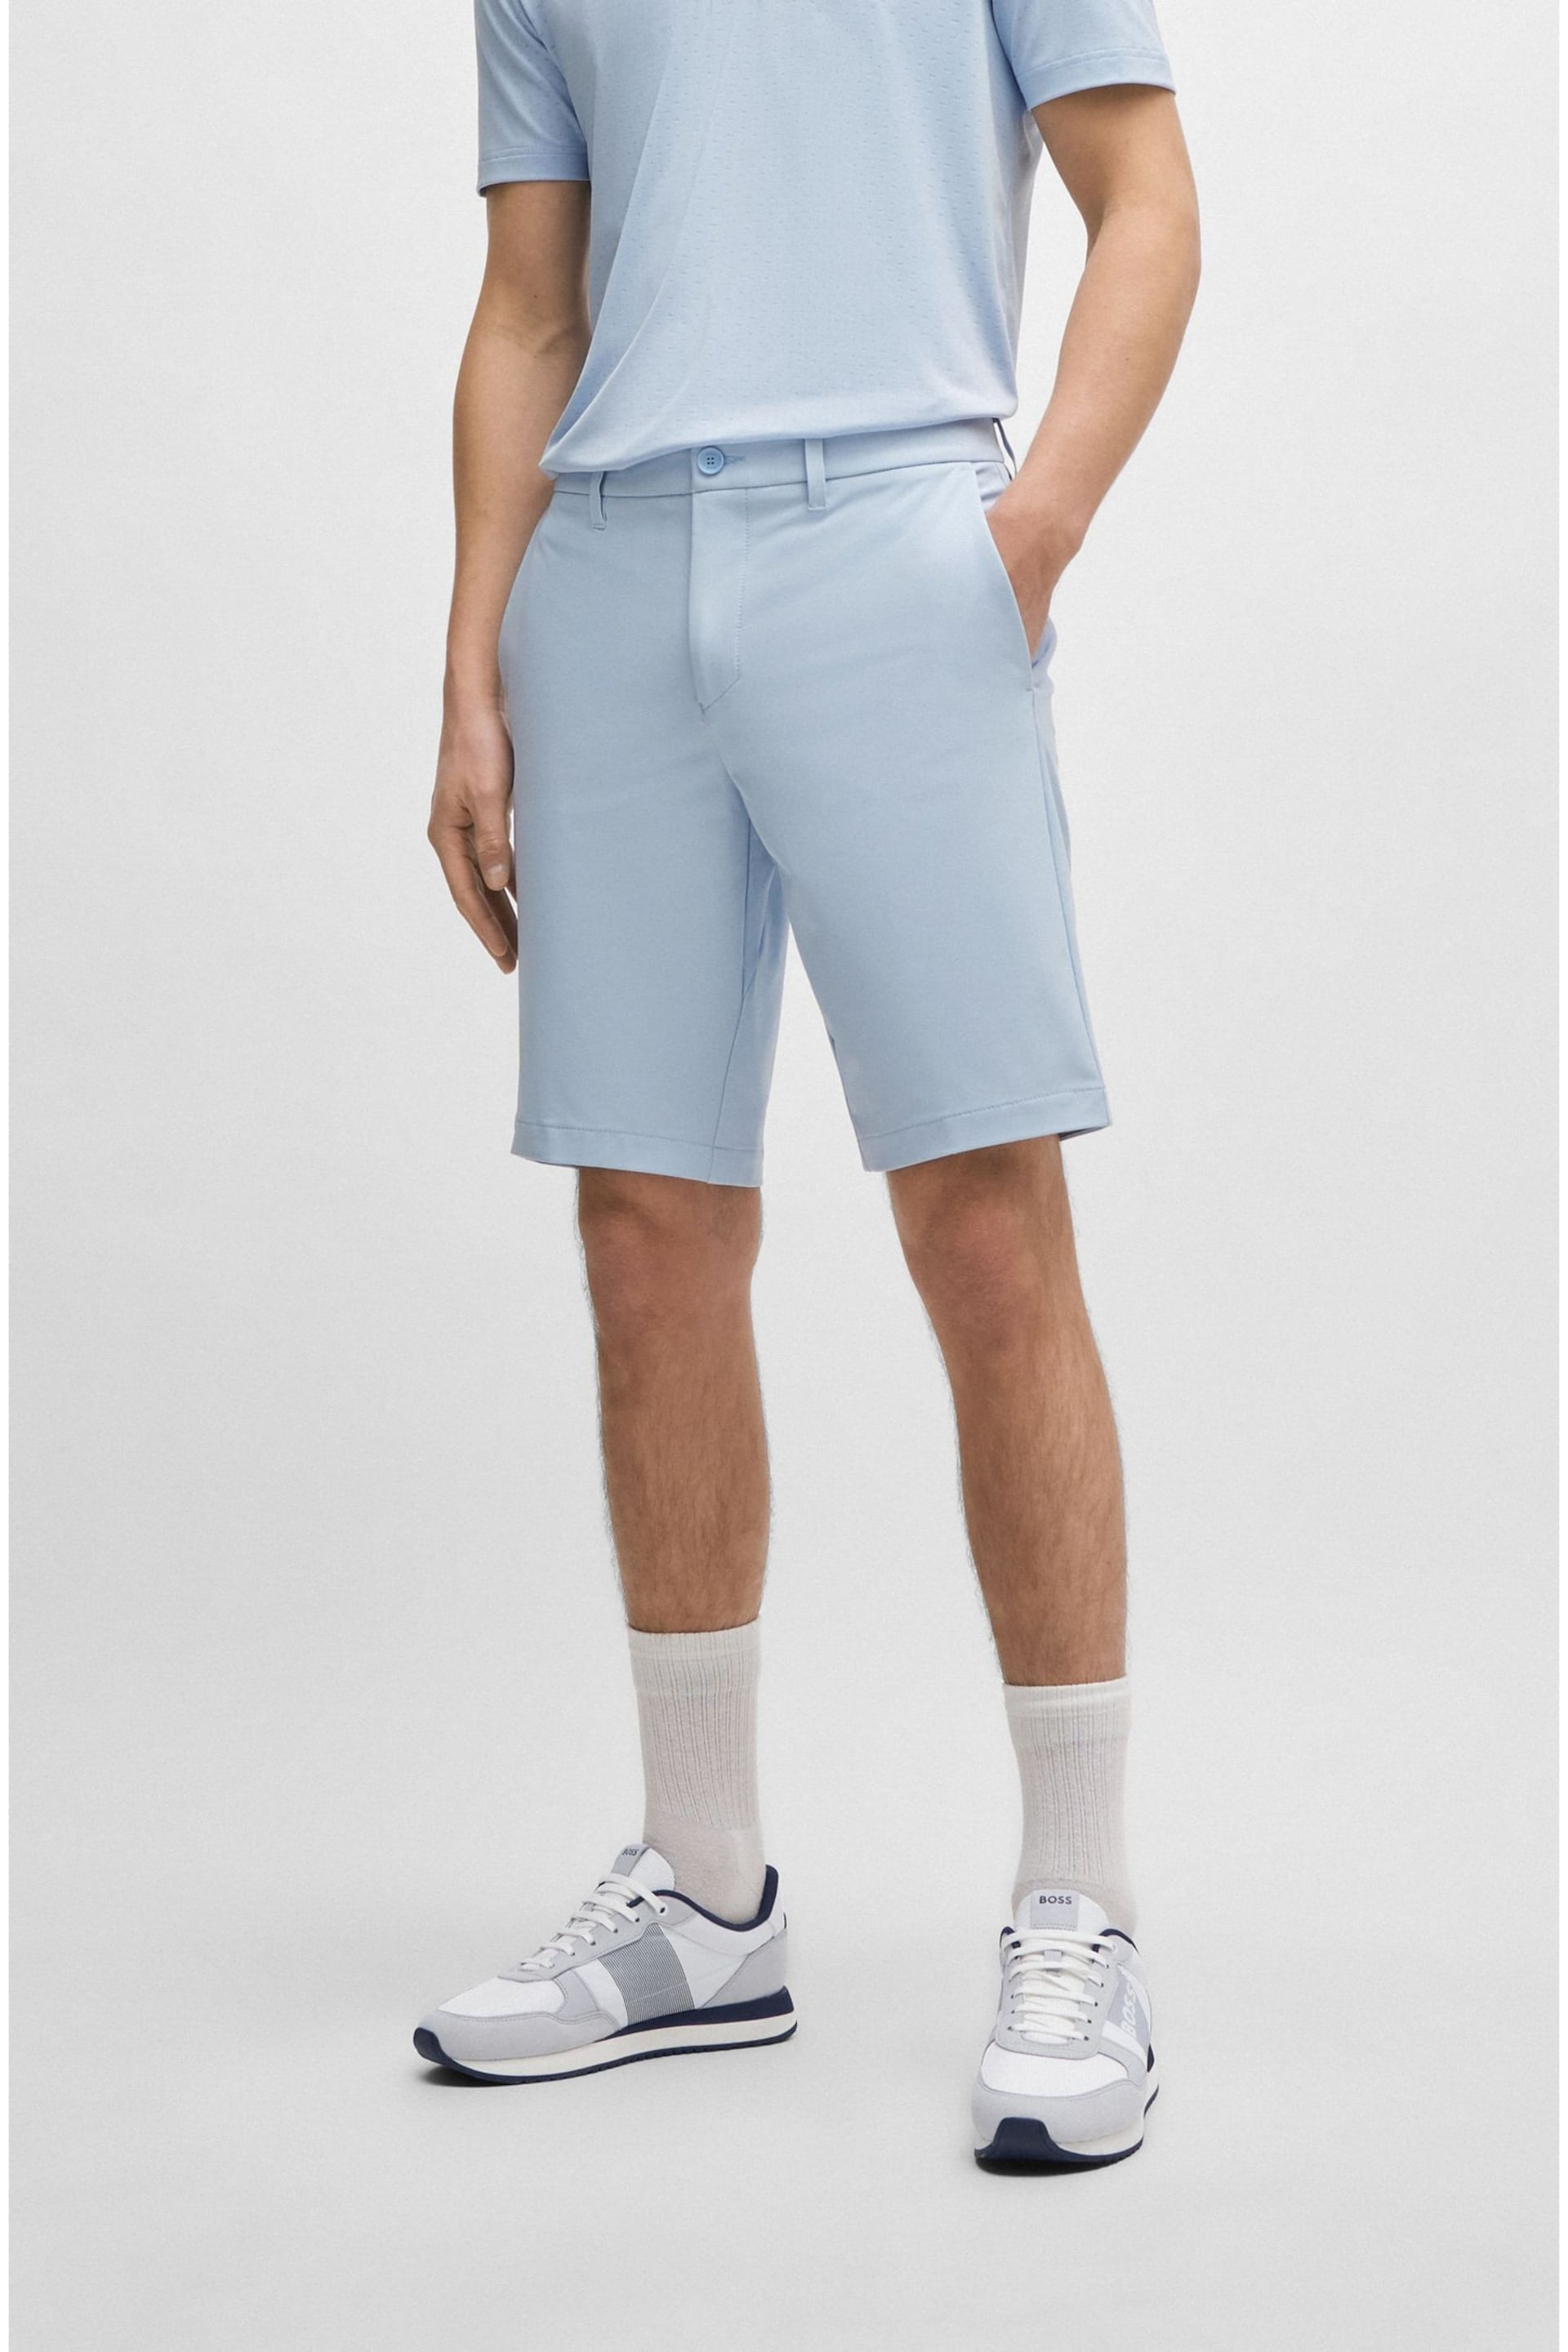 BOSS Light Blue Slim-Fit Shorts in Water-Repellent Easy-Iron Fabric - Image 1 of 5